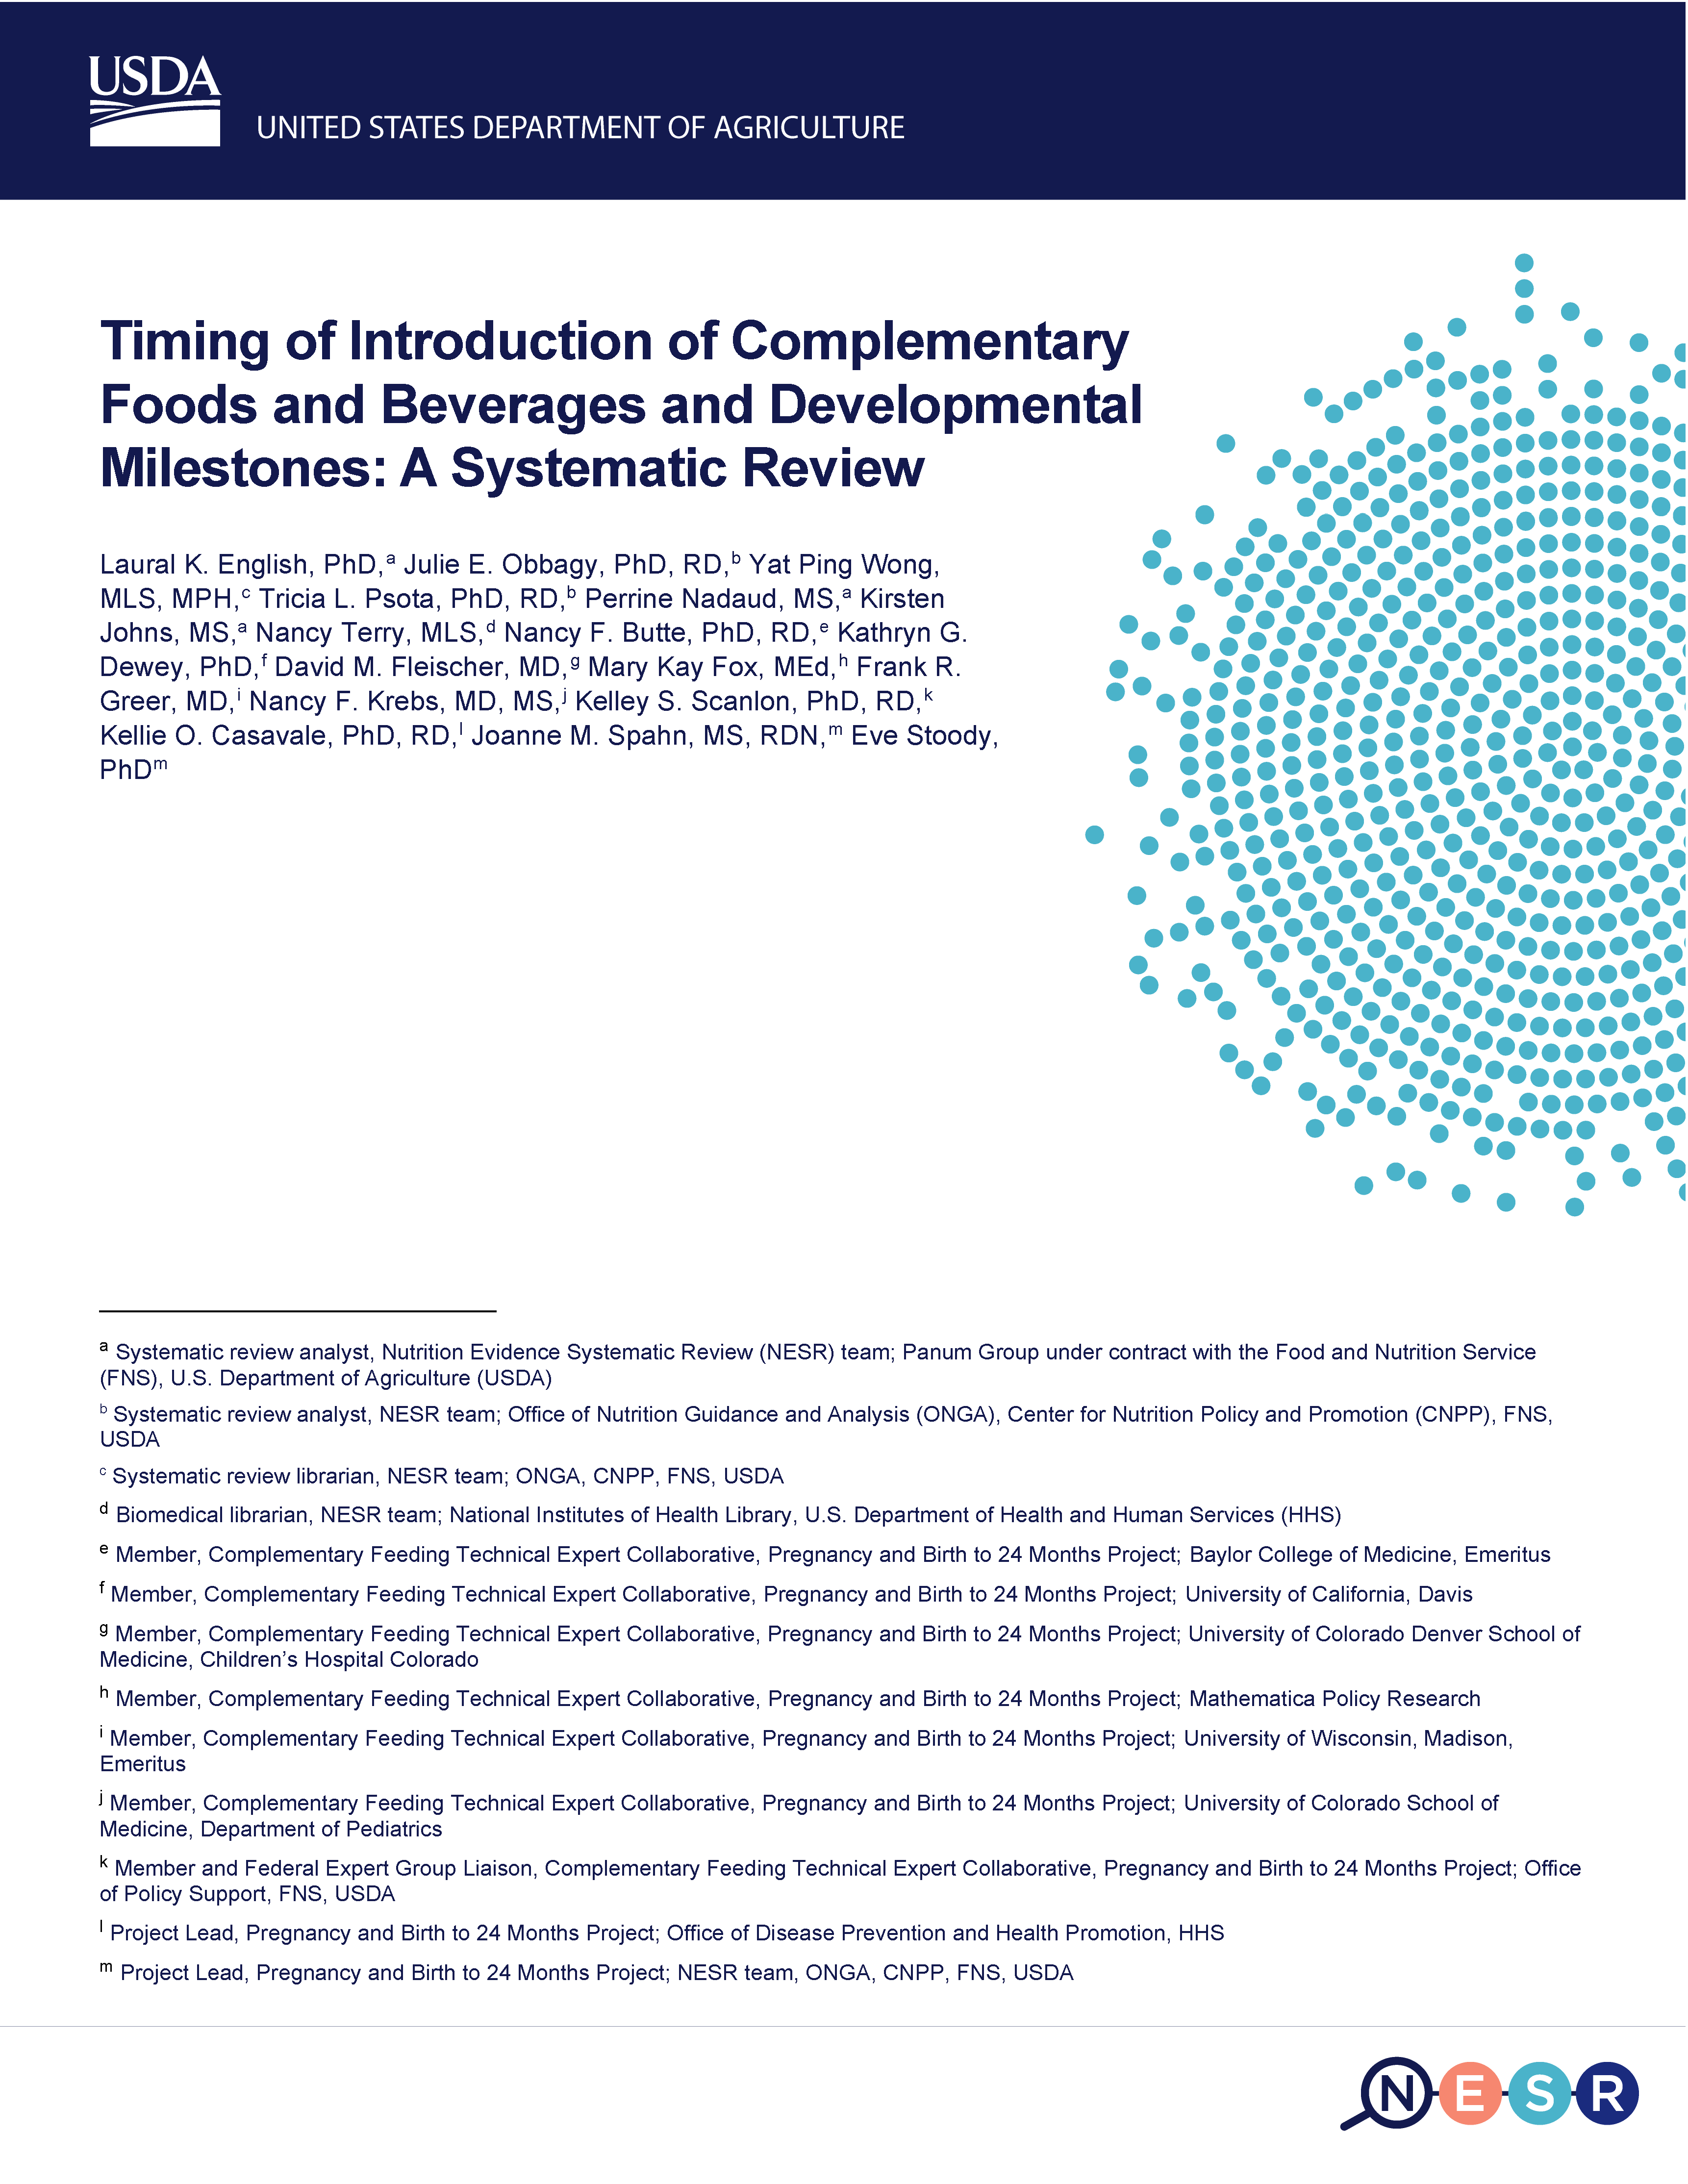 Cover of Timing of CFB and Developmental Milestones Report